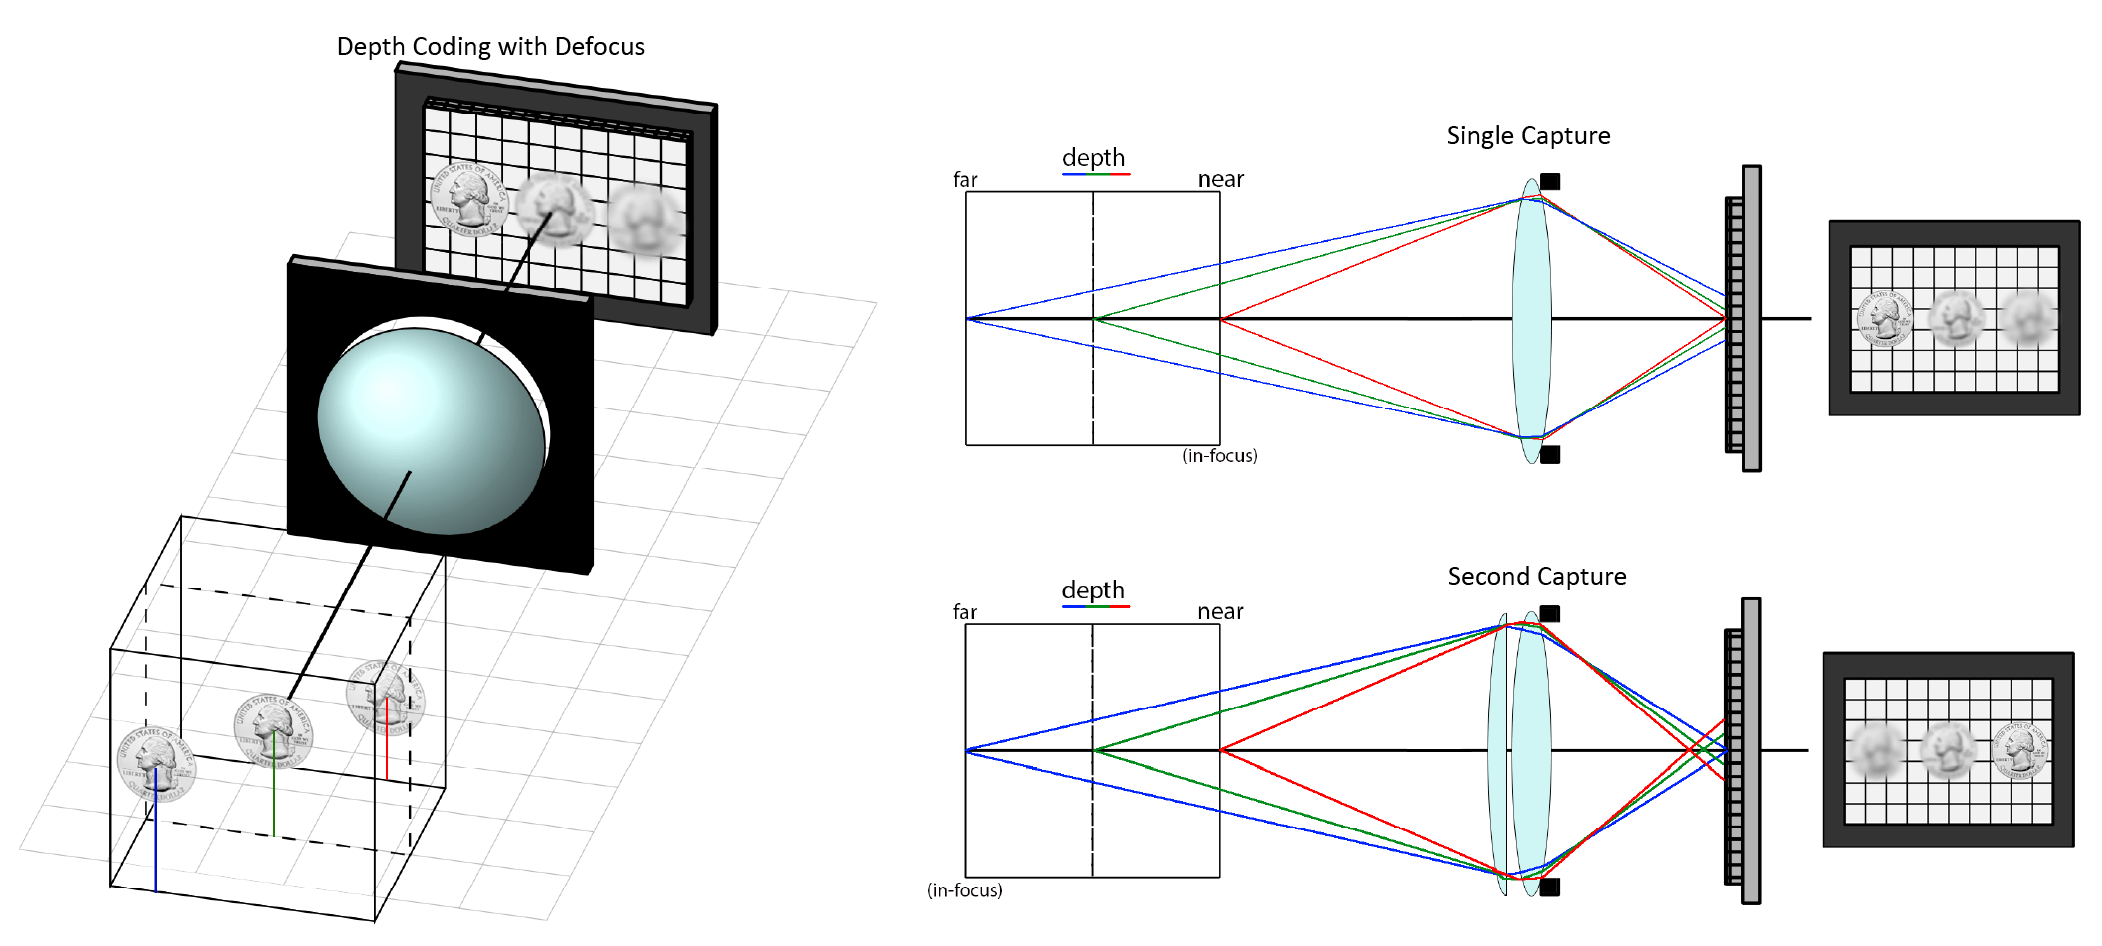 Illustration of depth defocus with three quarters at different depths resulting in different focus levels